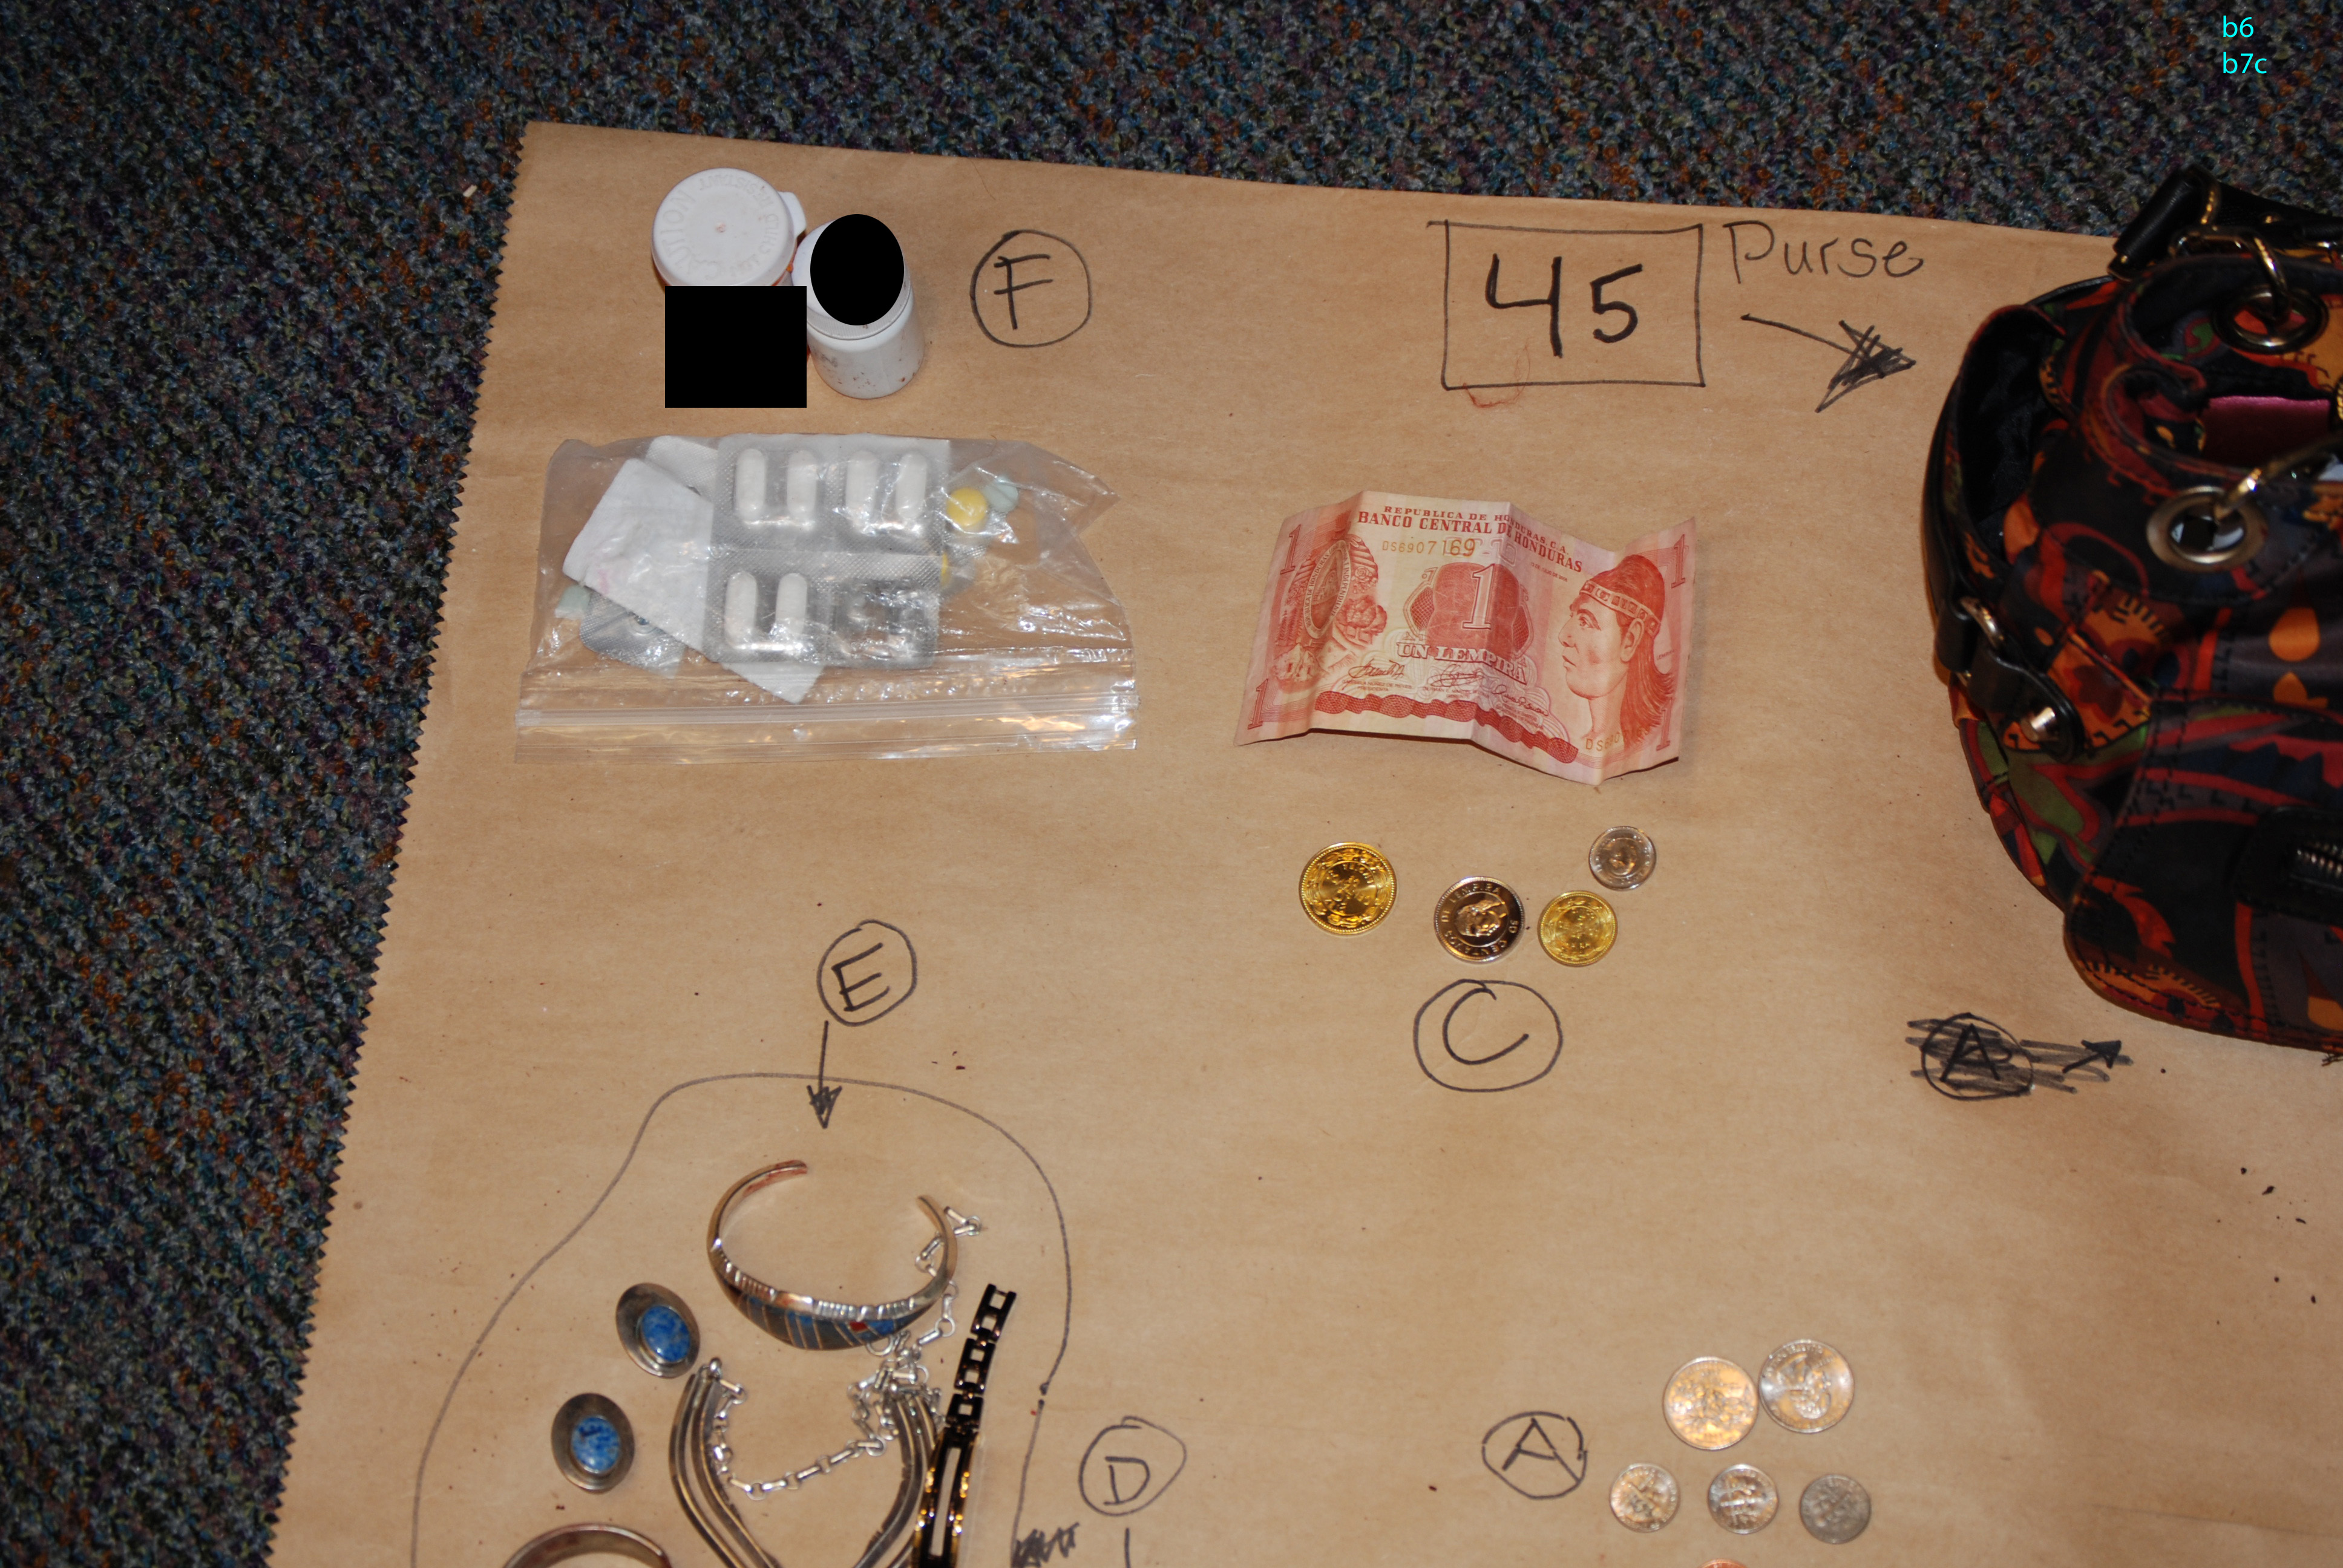 2011 Tucson Shooting Belongings Recovered - Photograph 3